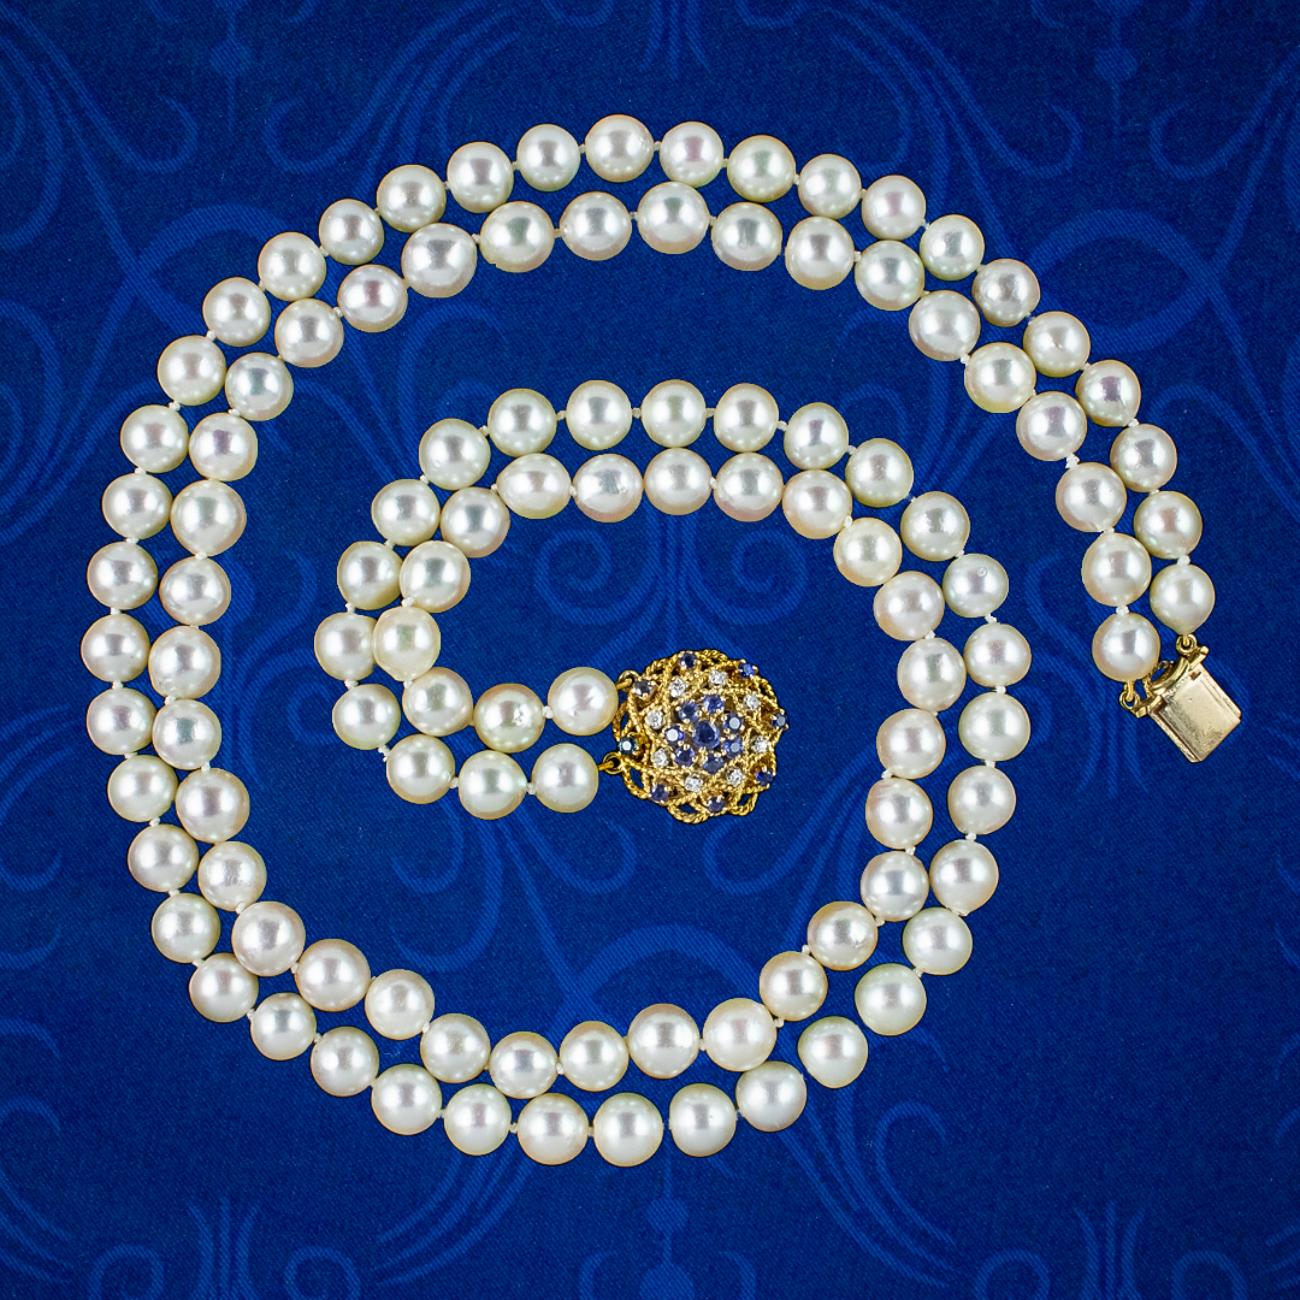 A classy vintage pearl matinee necklace from the late 20th Century displaying two strands of luxurious, creamy-white cultured pearls that are exceptionally bright with a smooth glossy surface.   

Pearls are the birthstone of June and a true